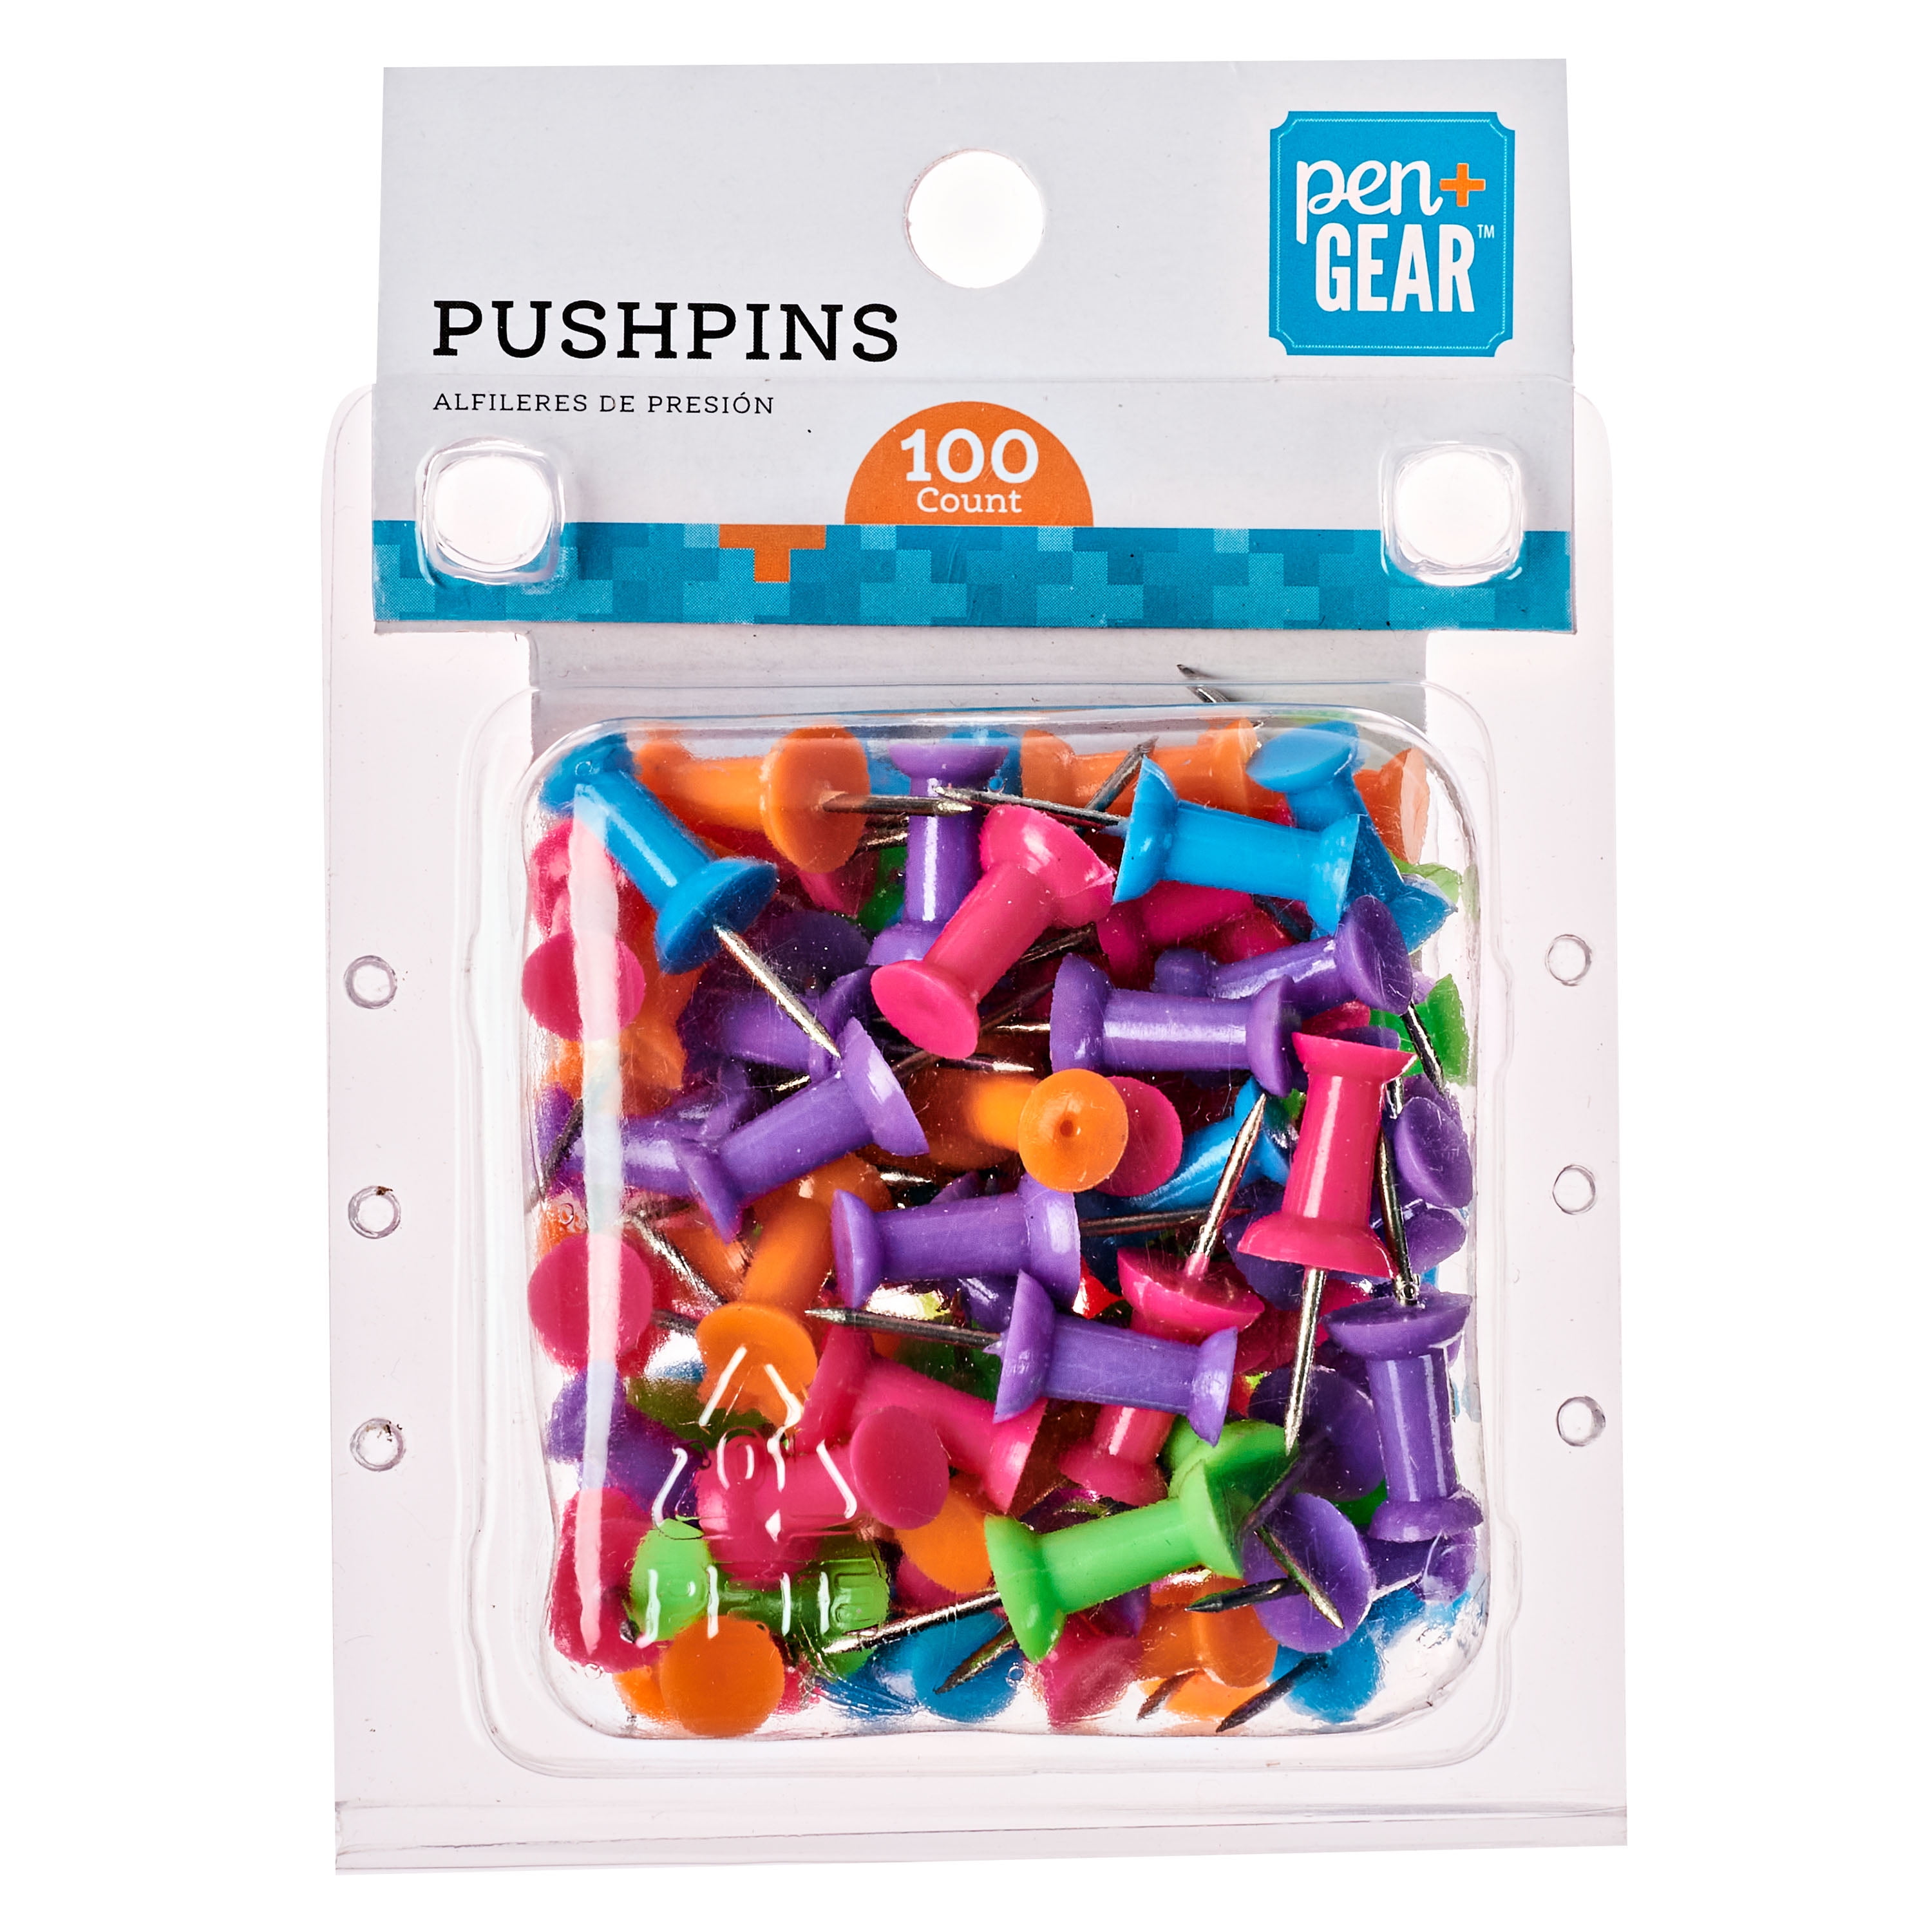 Quill Assorted Color Push Pins 100CT #11173QL